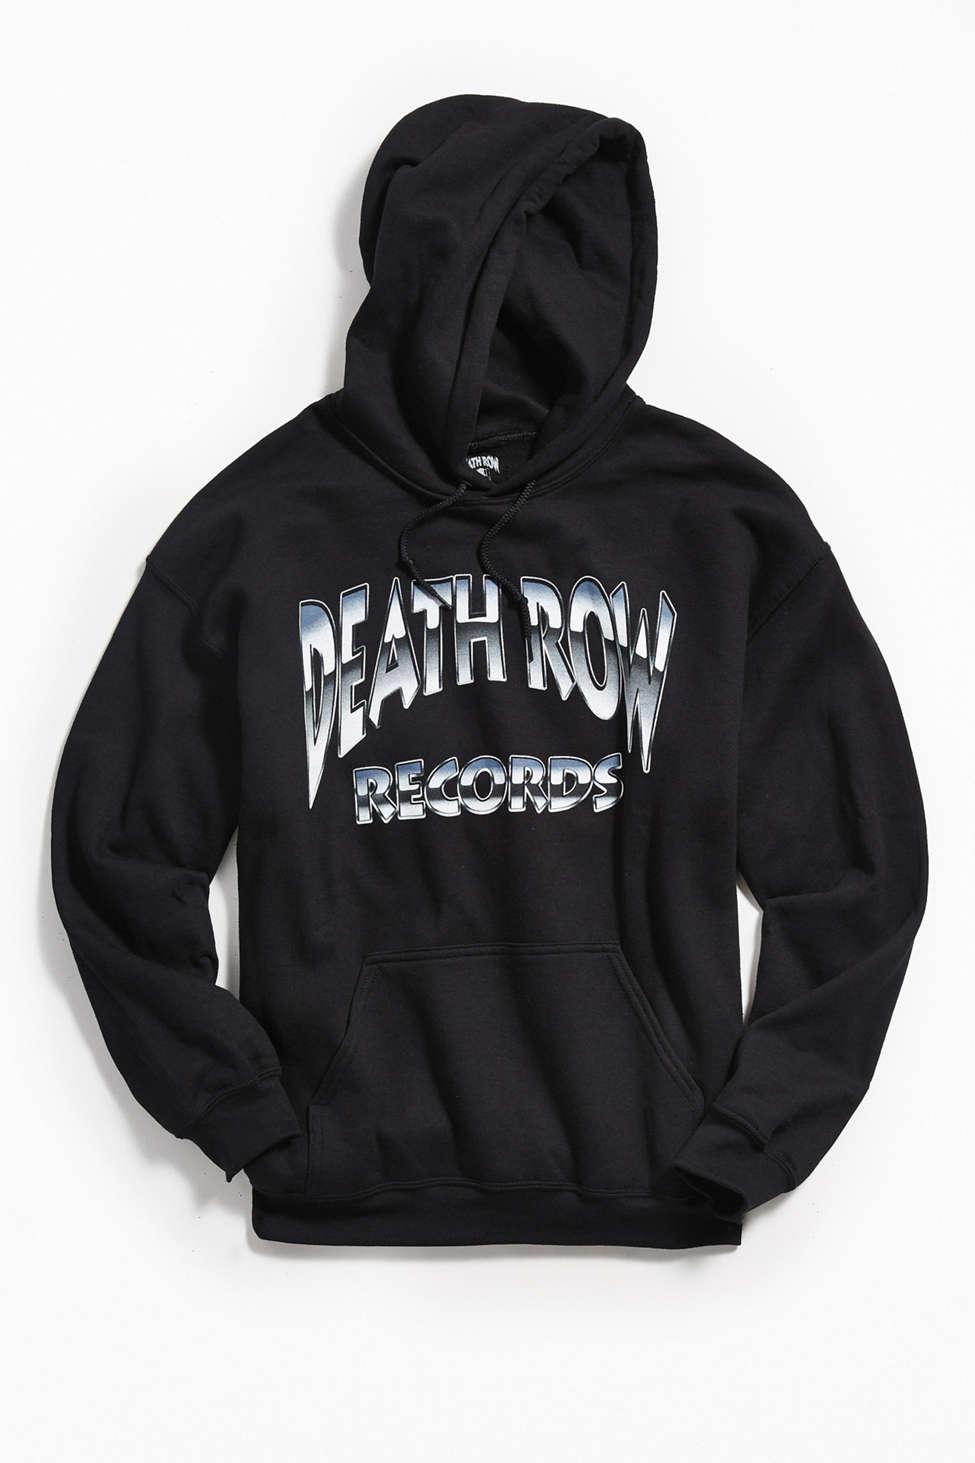 Urban Outfitters Cotton Death Row Records Hoodie